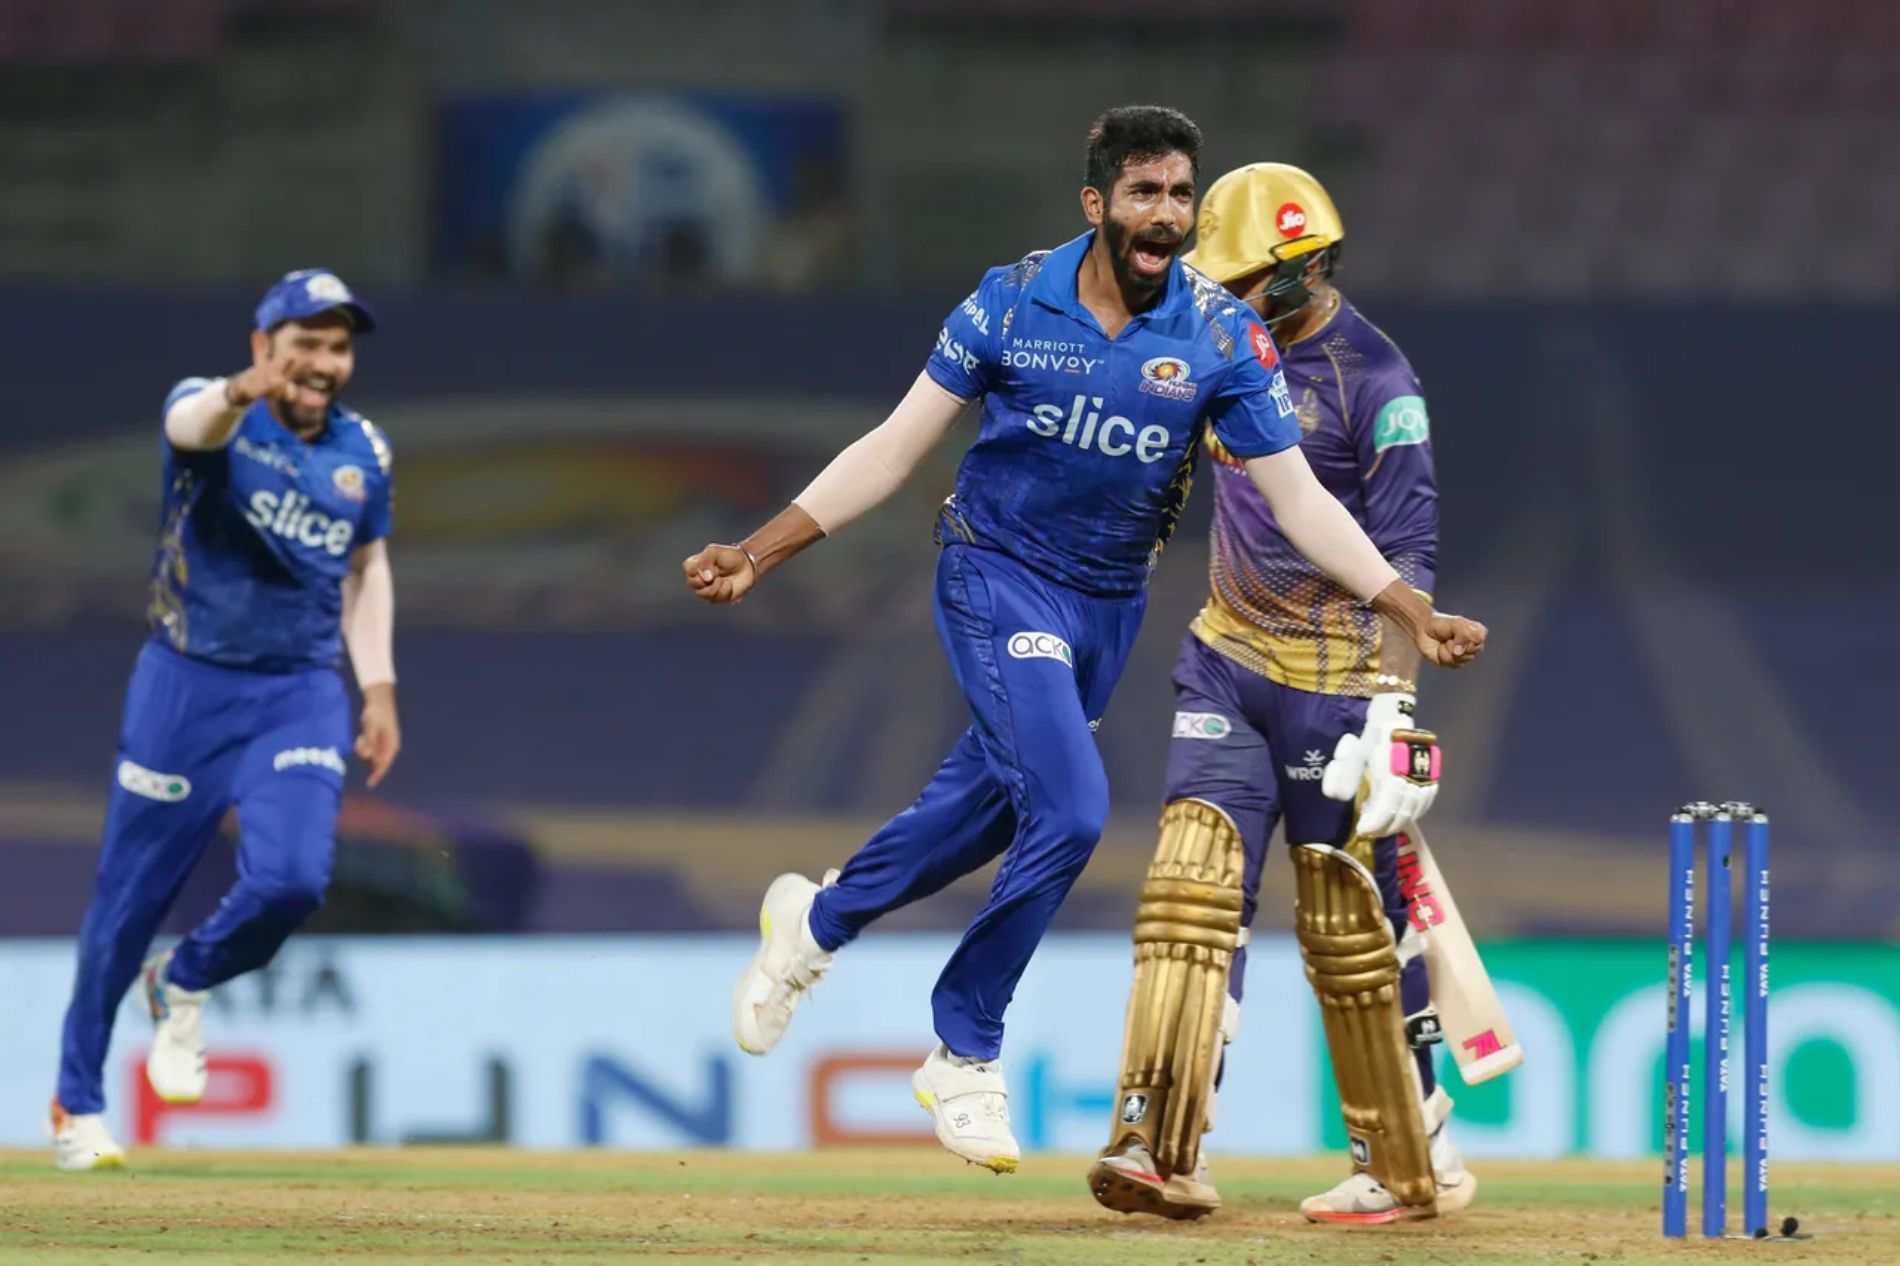 Jasprit Bumrah is ecstatic after claiming a wicket. Pic: IPLT20.COM